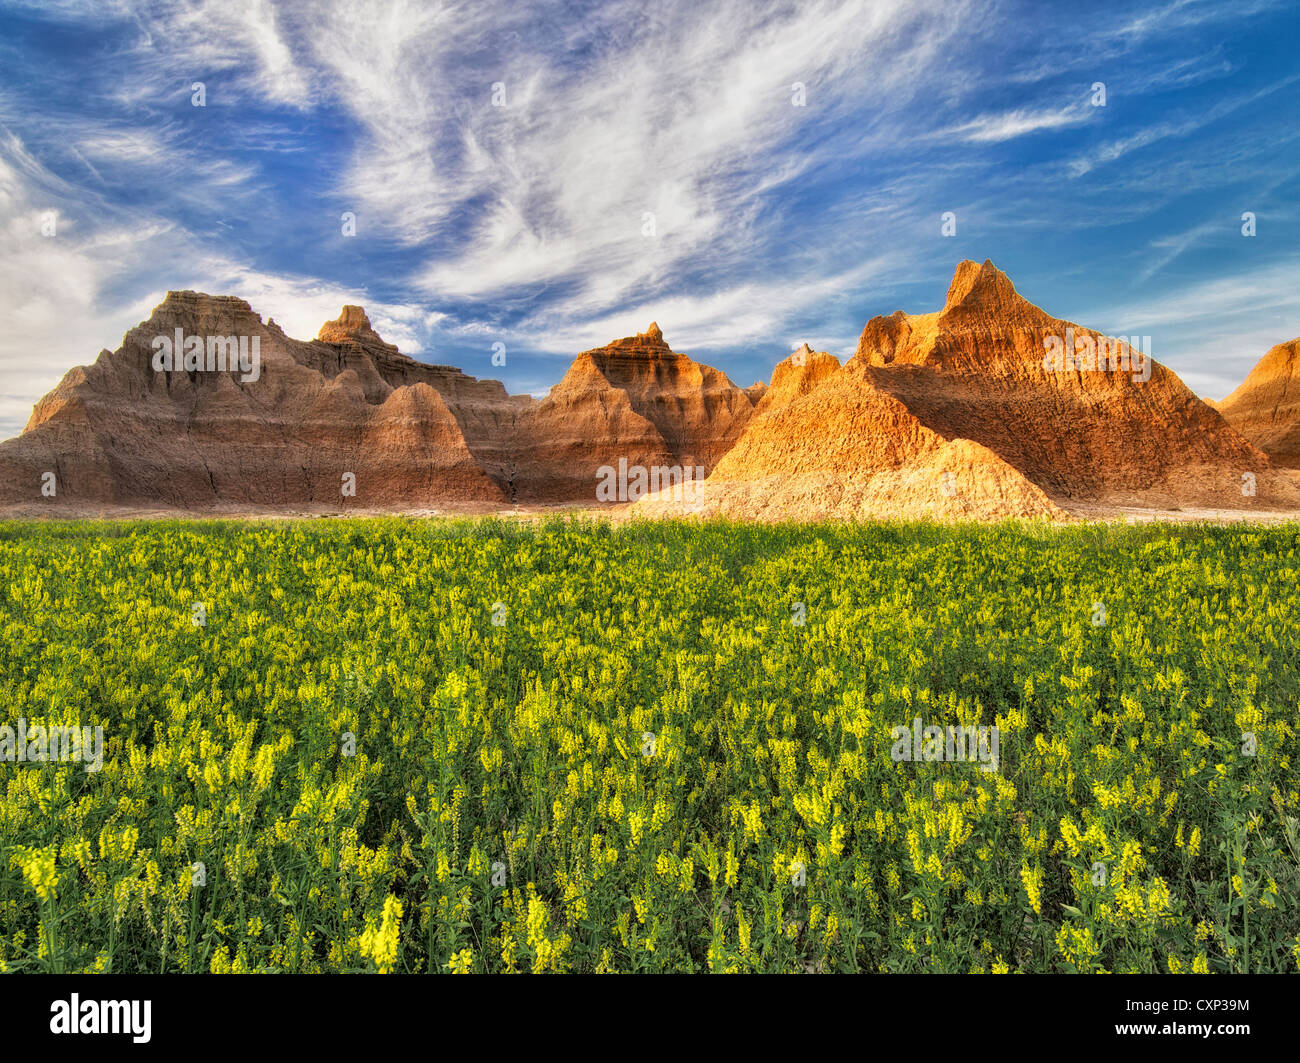 Yellow Sweet Clover and rock formations. Badlands National Park, South Dakota. Stock Photo